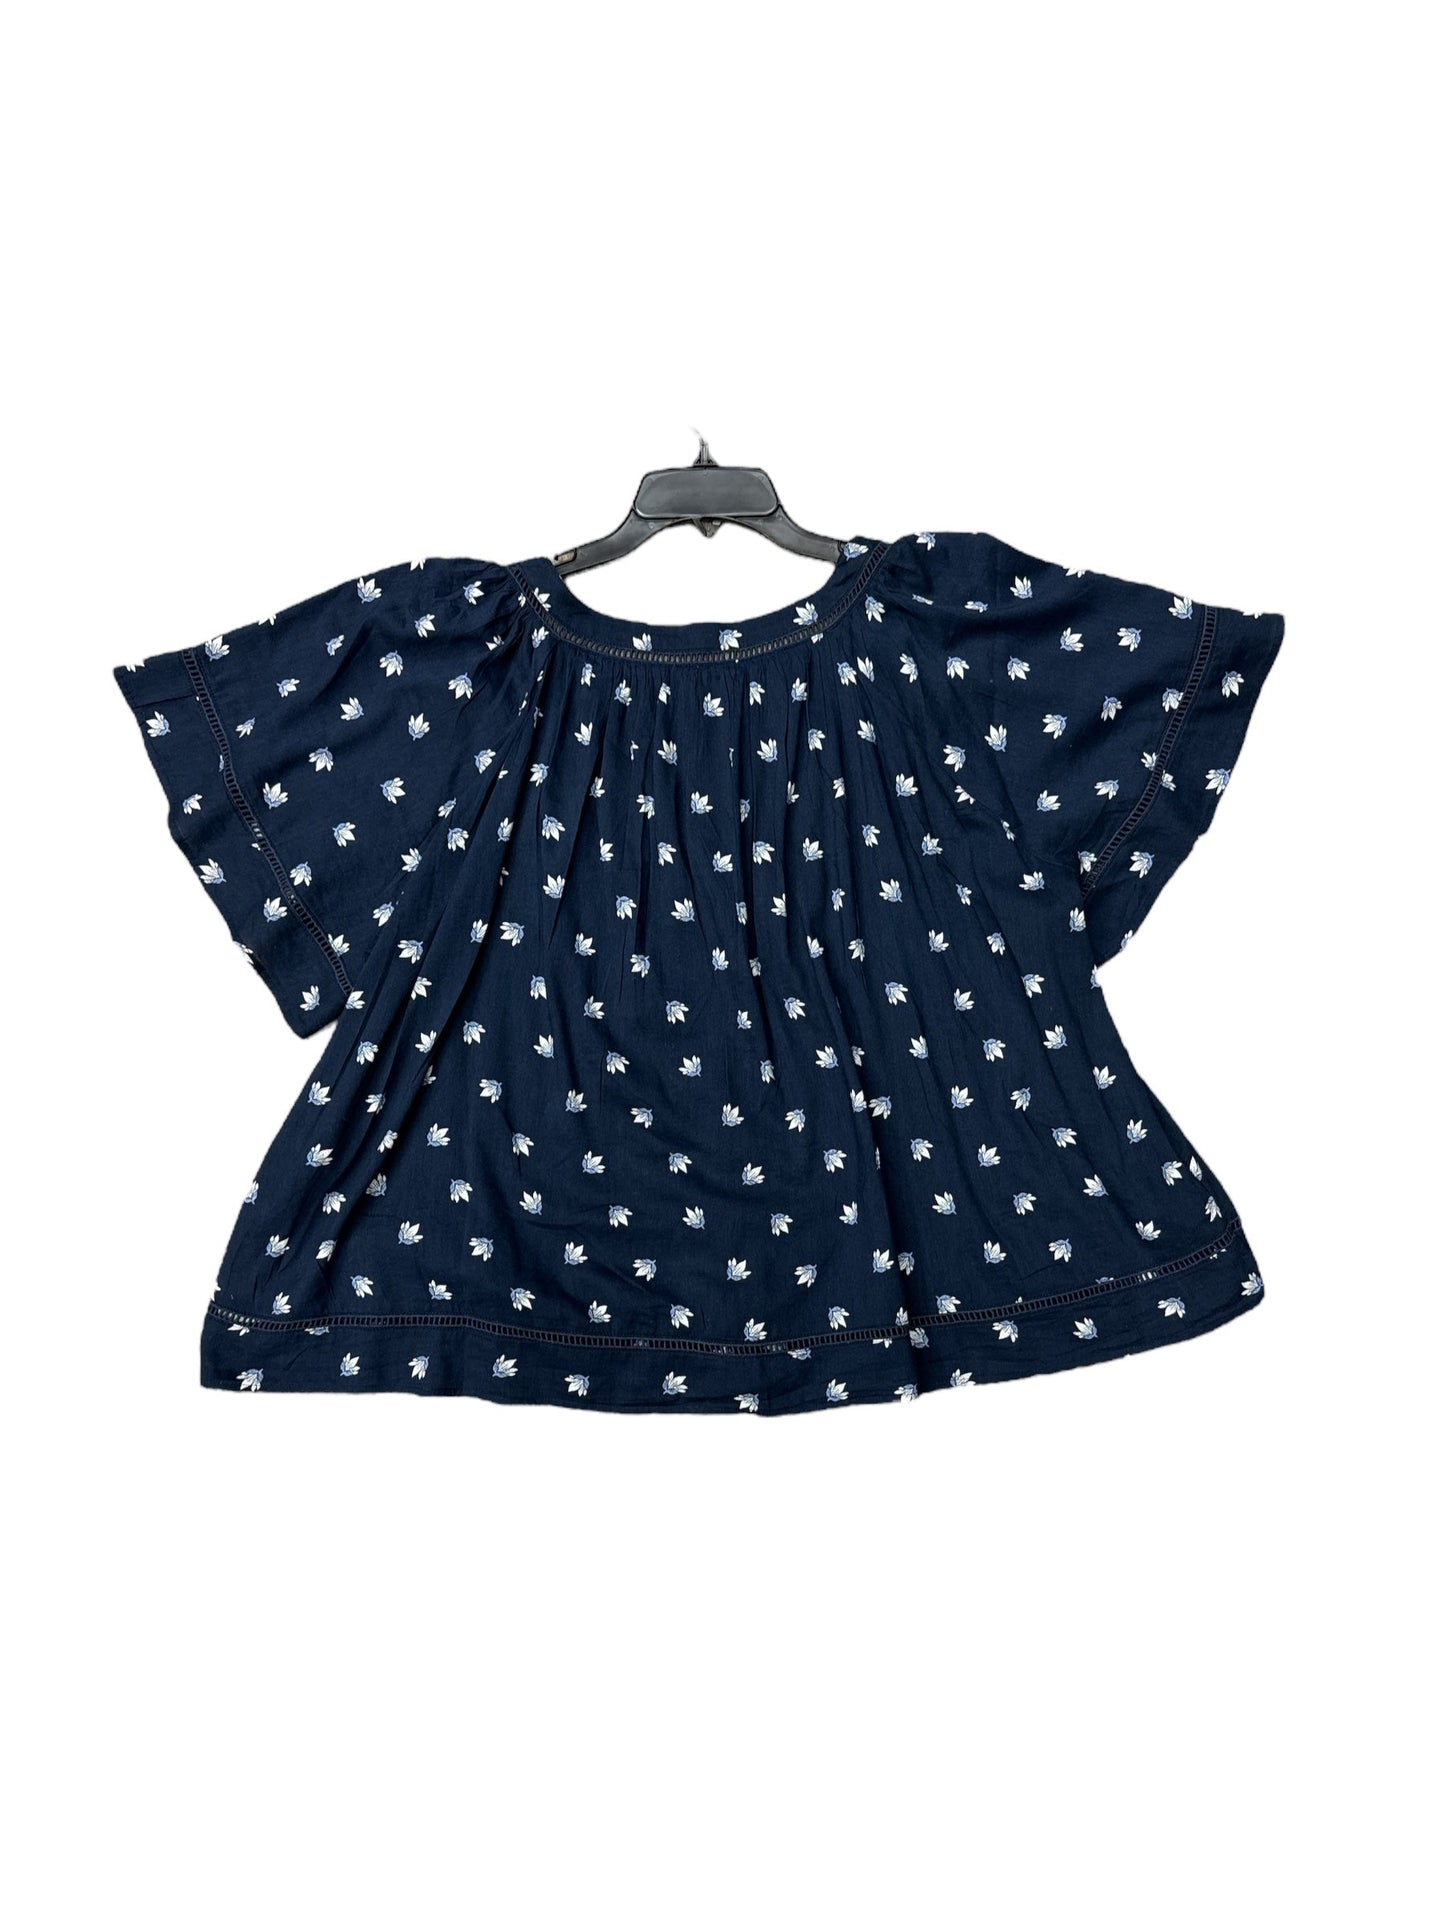 Navy Top Short Sleeve Old Navy, Size 2x